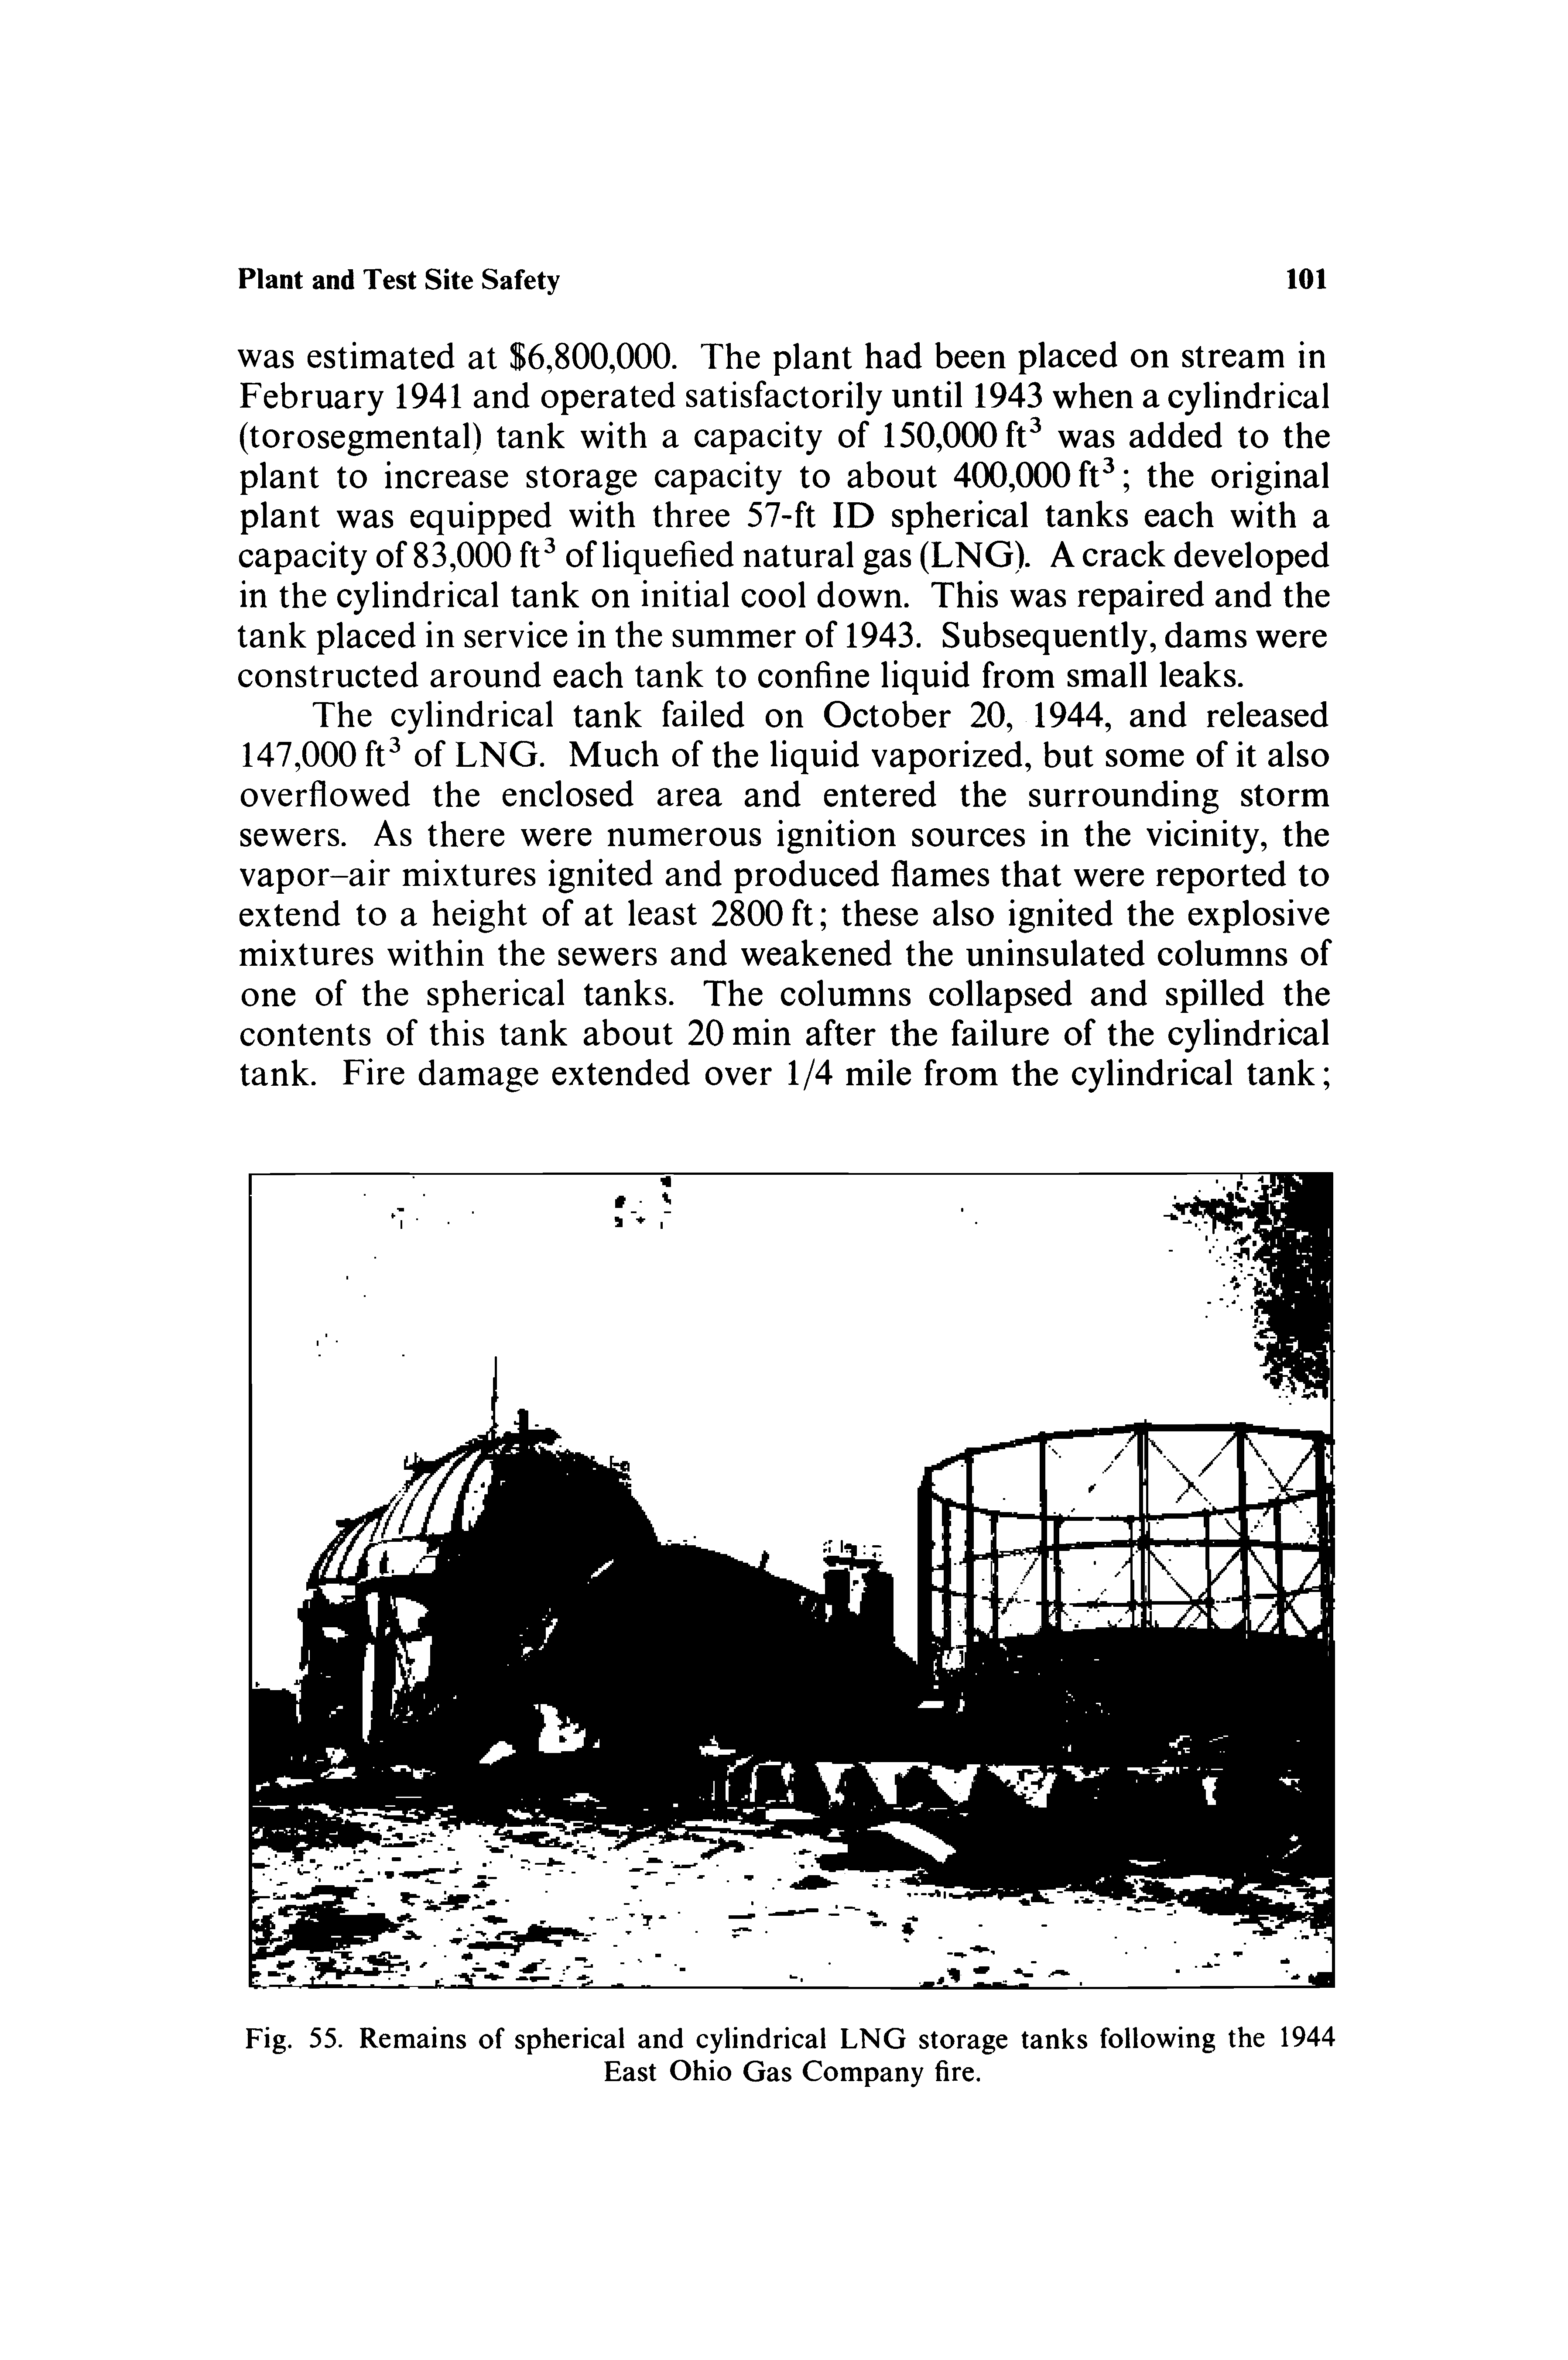 Fig. 55. Remains of spherical and cylindrical LNG storage tanks following the 1944 East Ohio Gas Company fire.